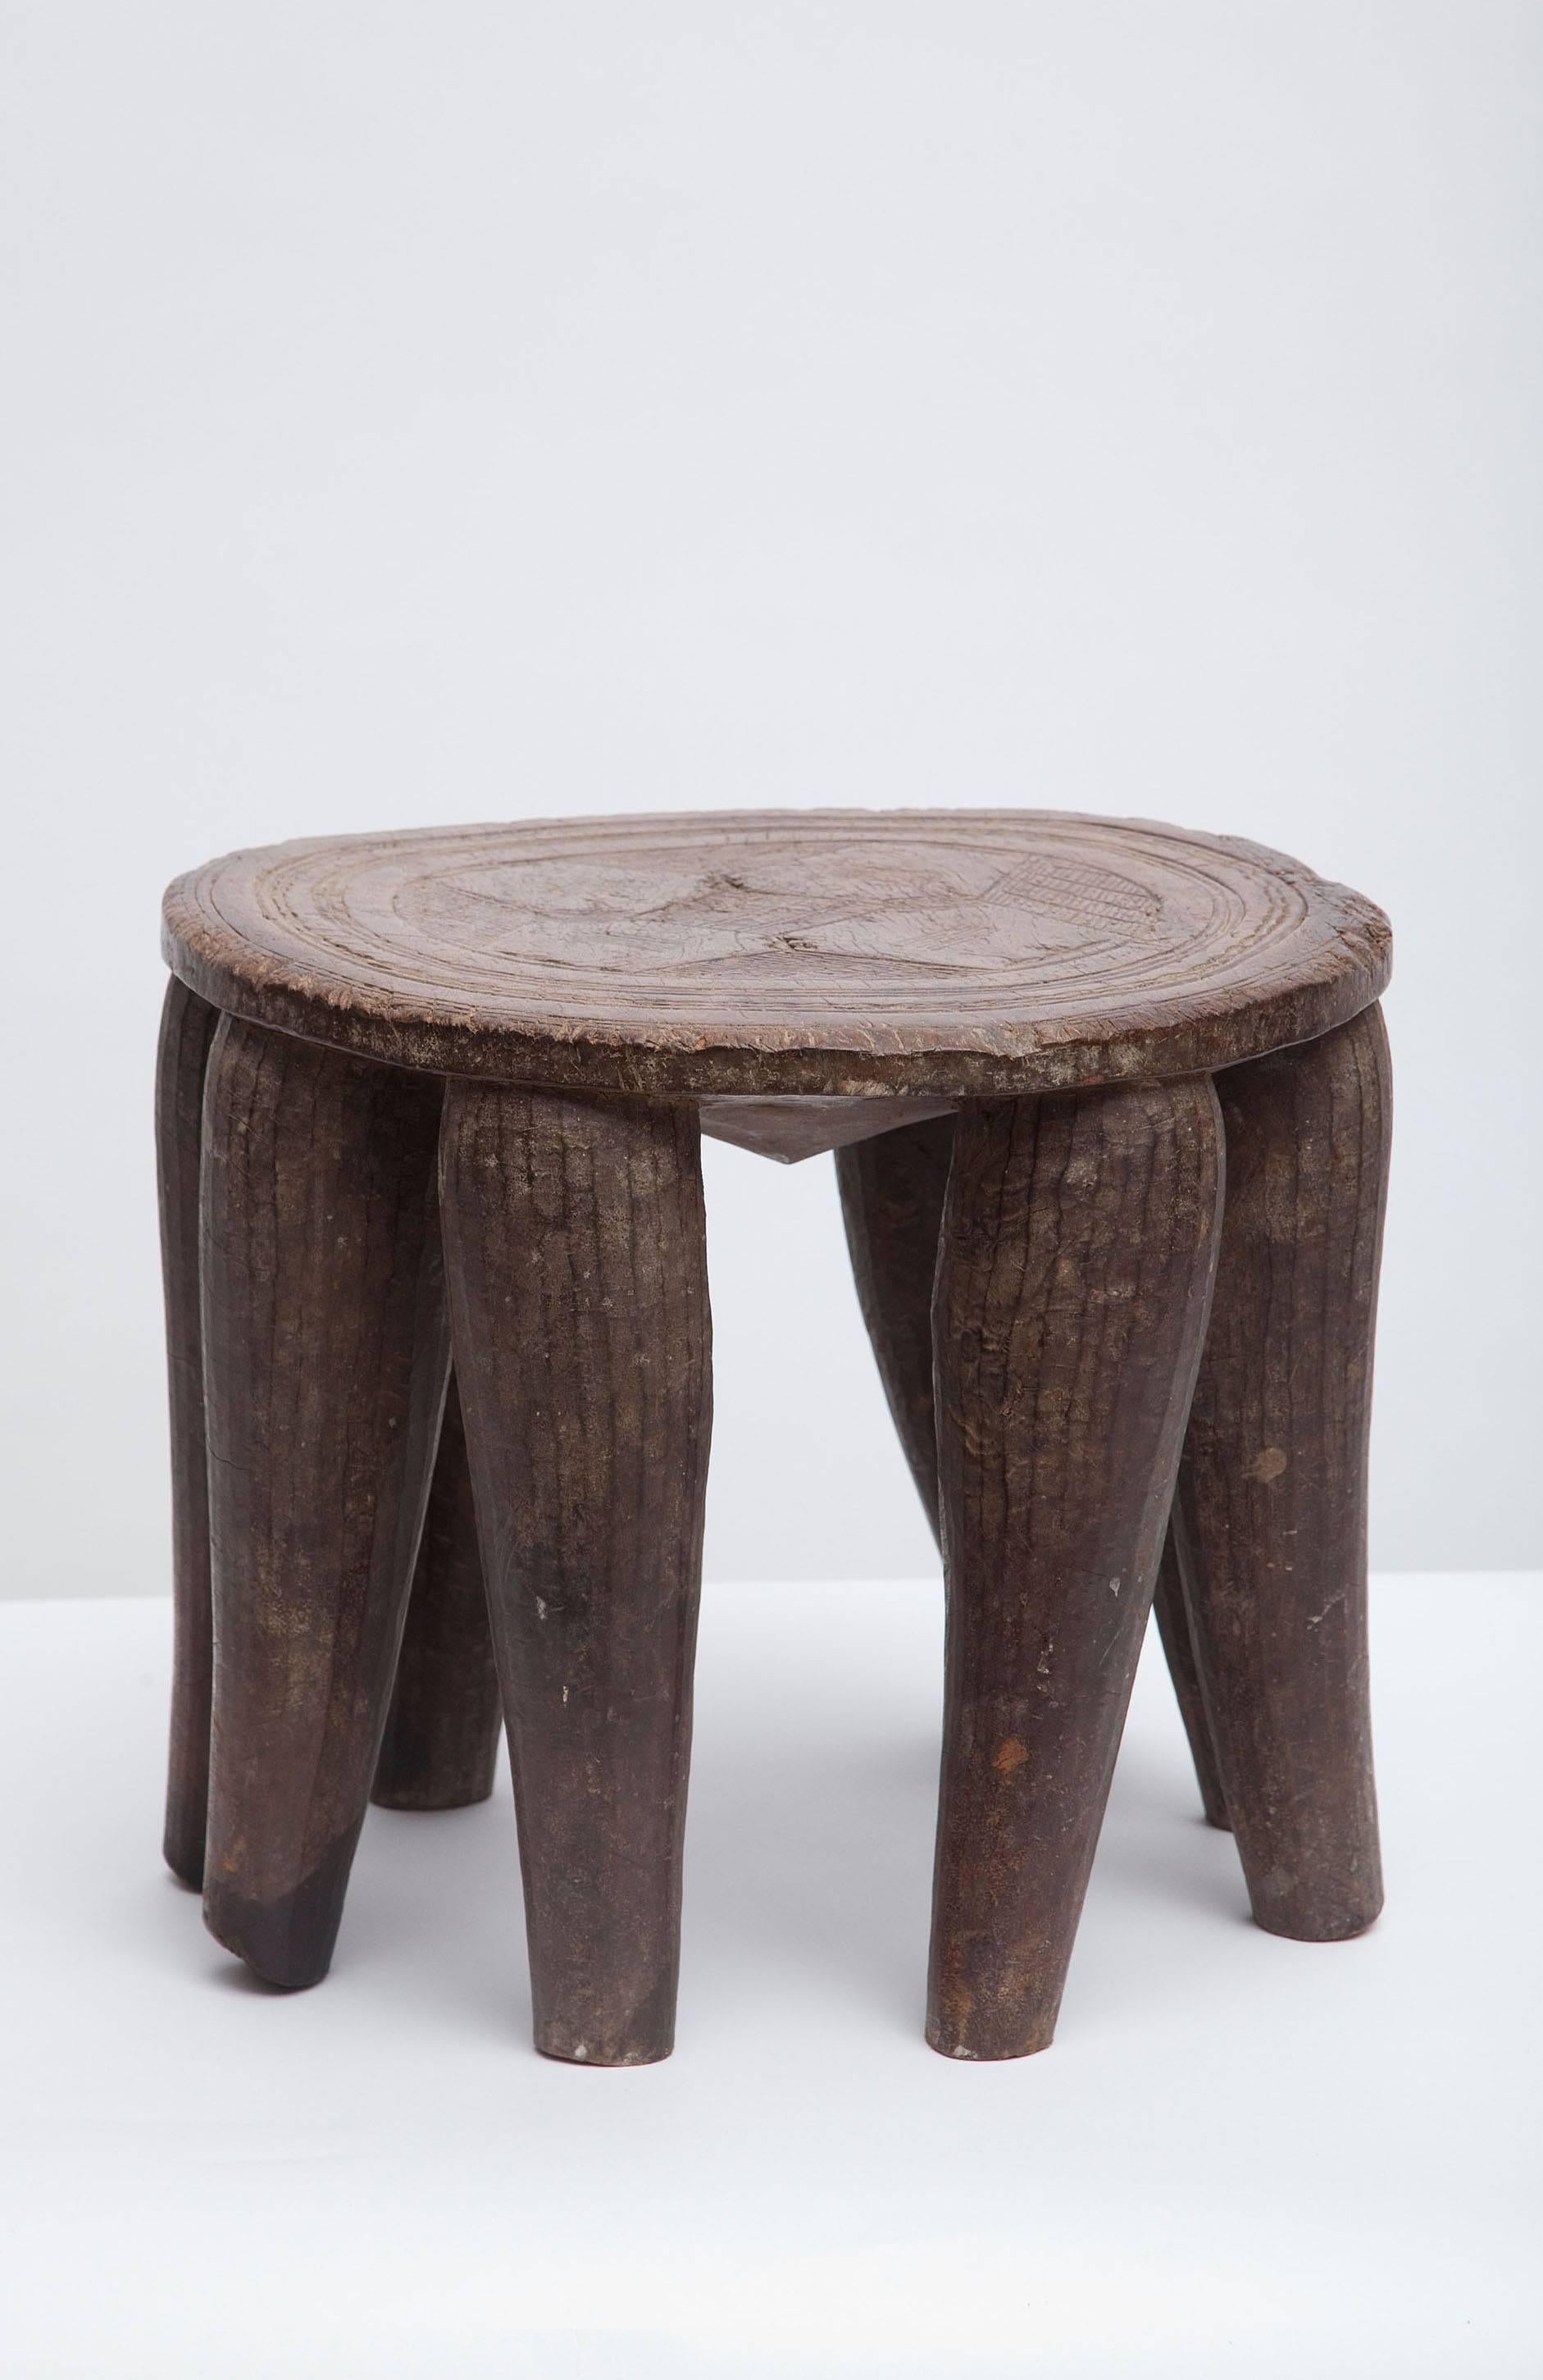 Hand-carved Nupe tribal stool. Nigeria, circa 1950. Excellent age and patina.